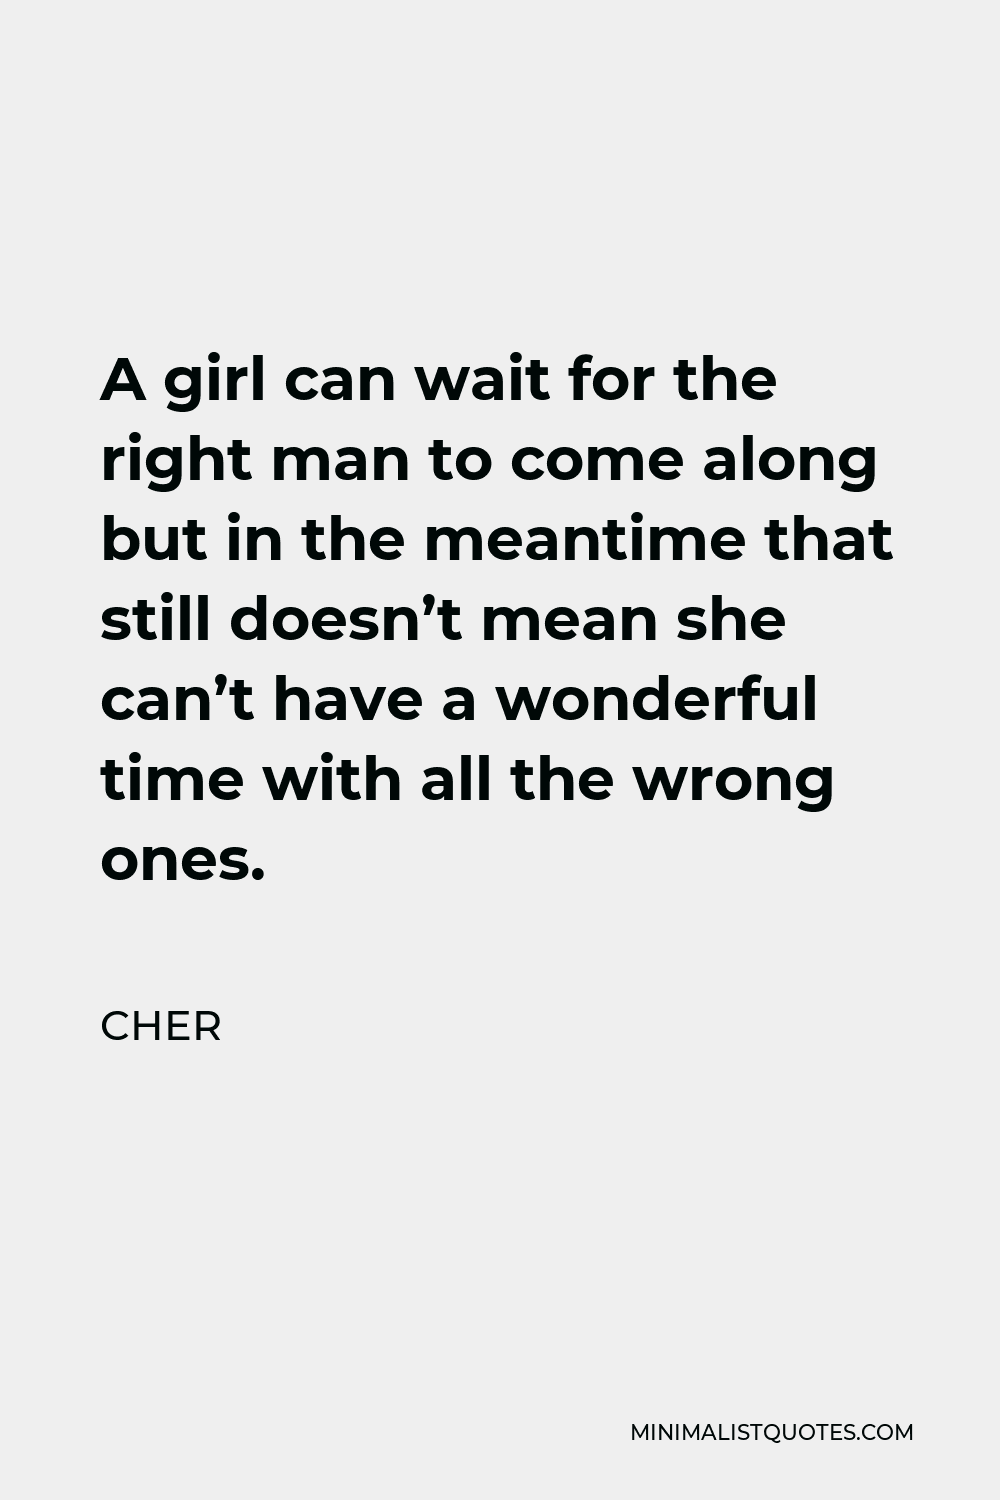 Cher Quote - A girl can wait for the right man to come along but in the meantime that still doesn’t mean she can’t have a wonderful time with all the wrong ones.